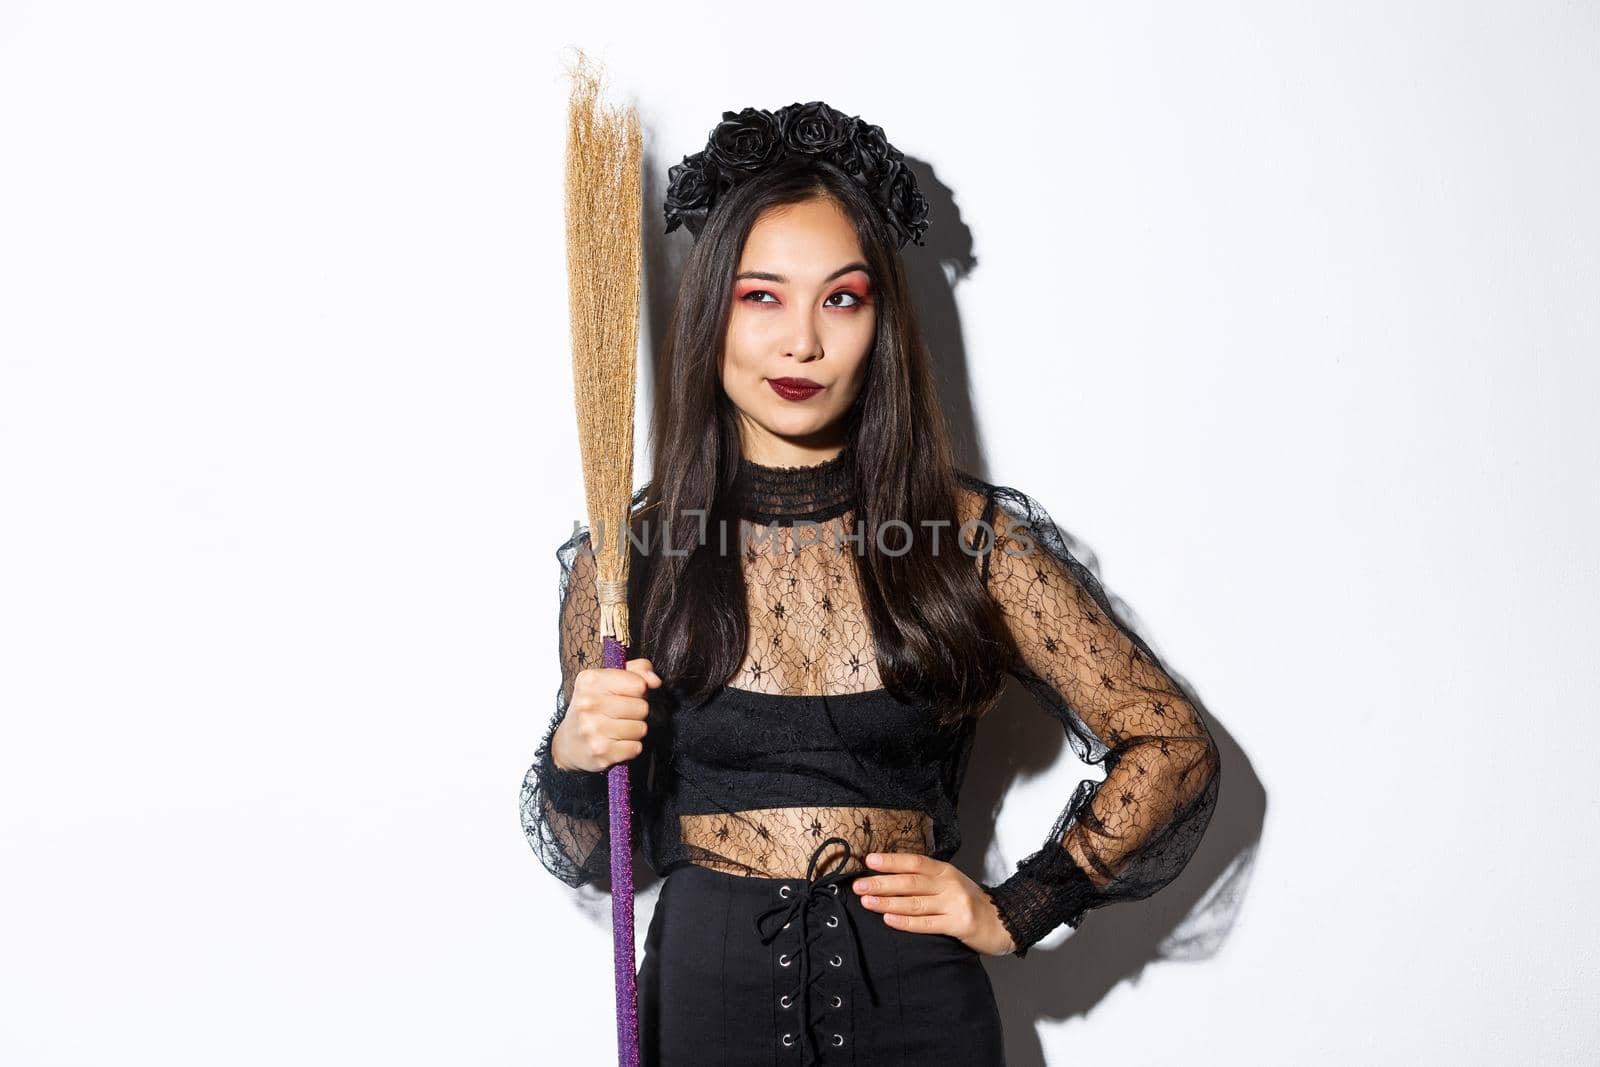 Portrait of smart thoughtful asian girl looking at upper left corner with pleased smirk, holding broom, wearing witch costume for halloween party, standing over white background.